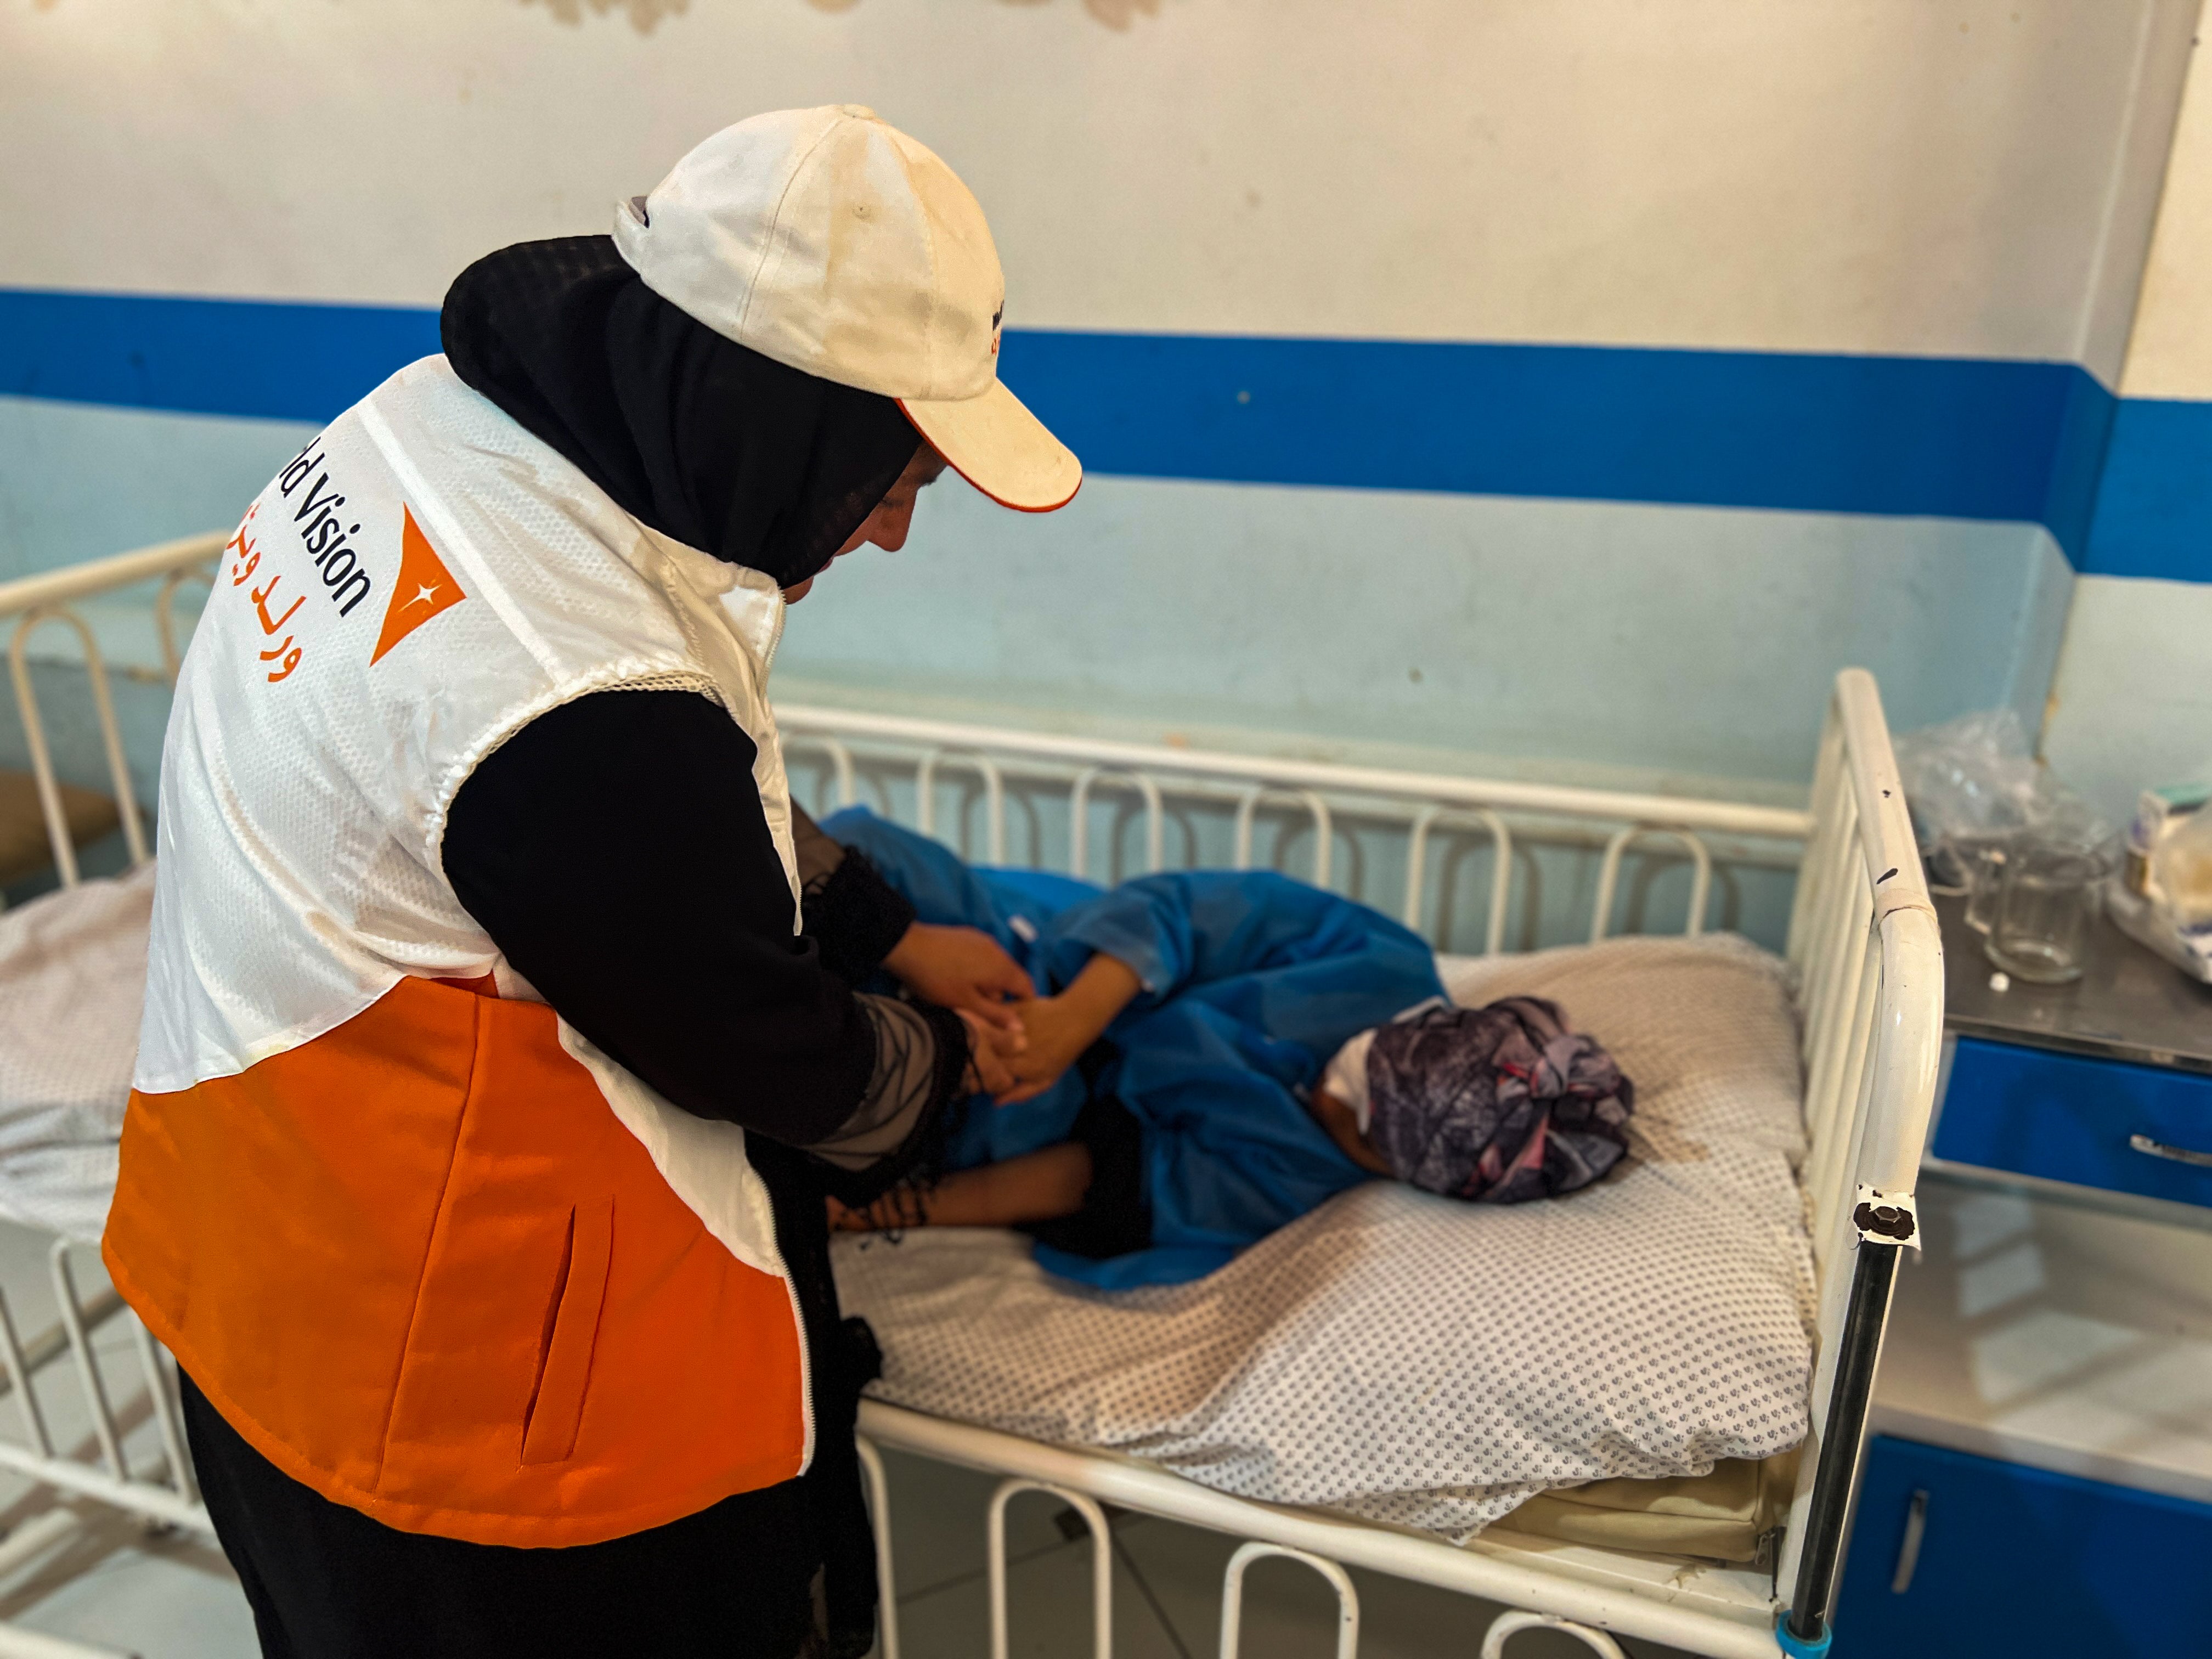 A World Vision staff member helps a patient laying on a bed in a health clinic